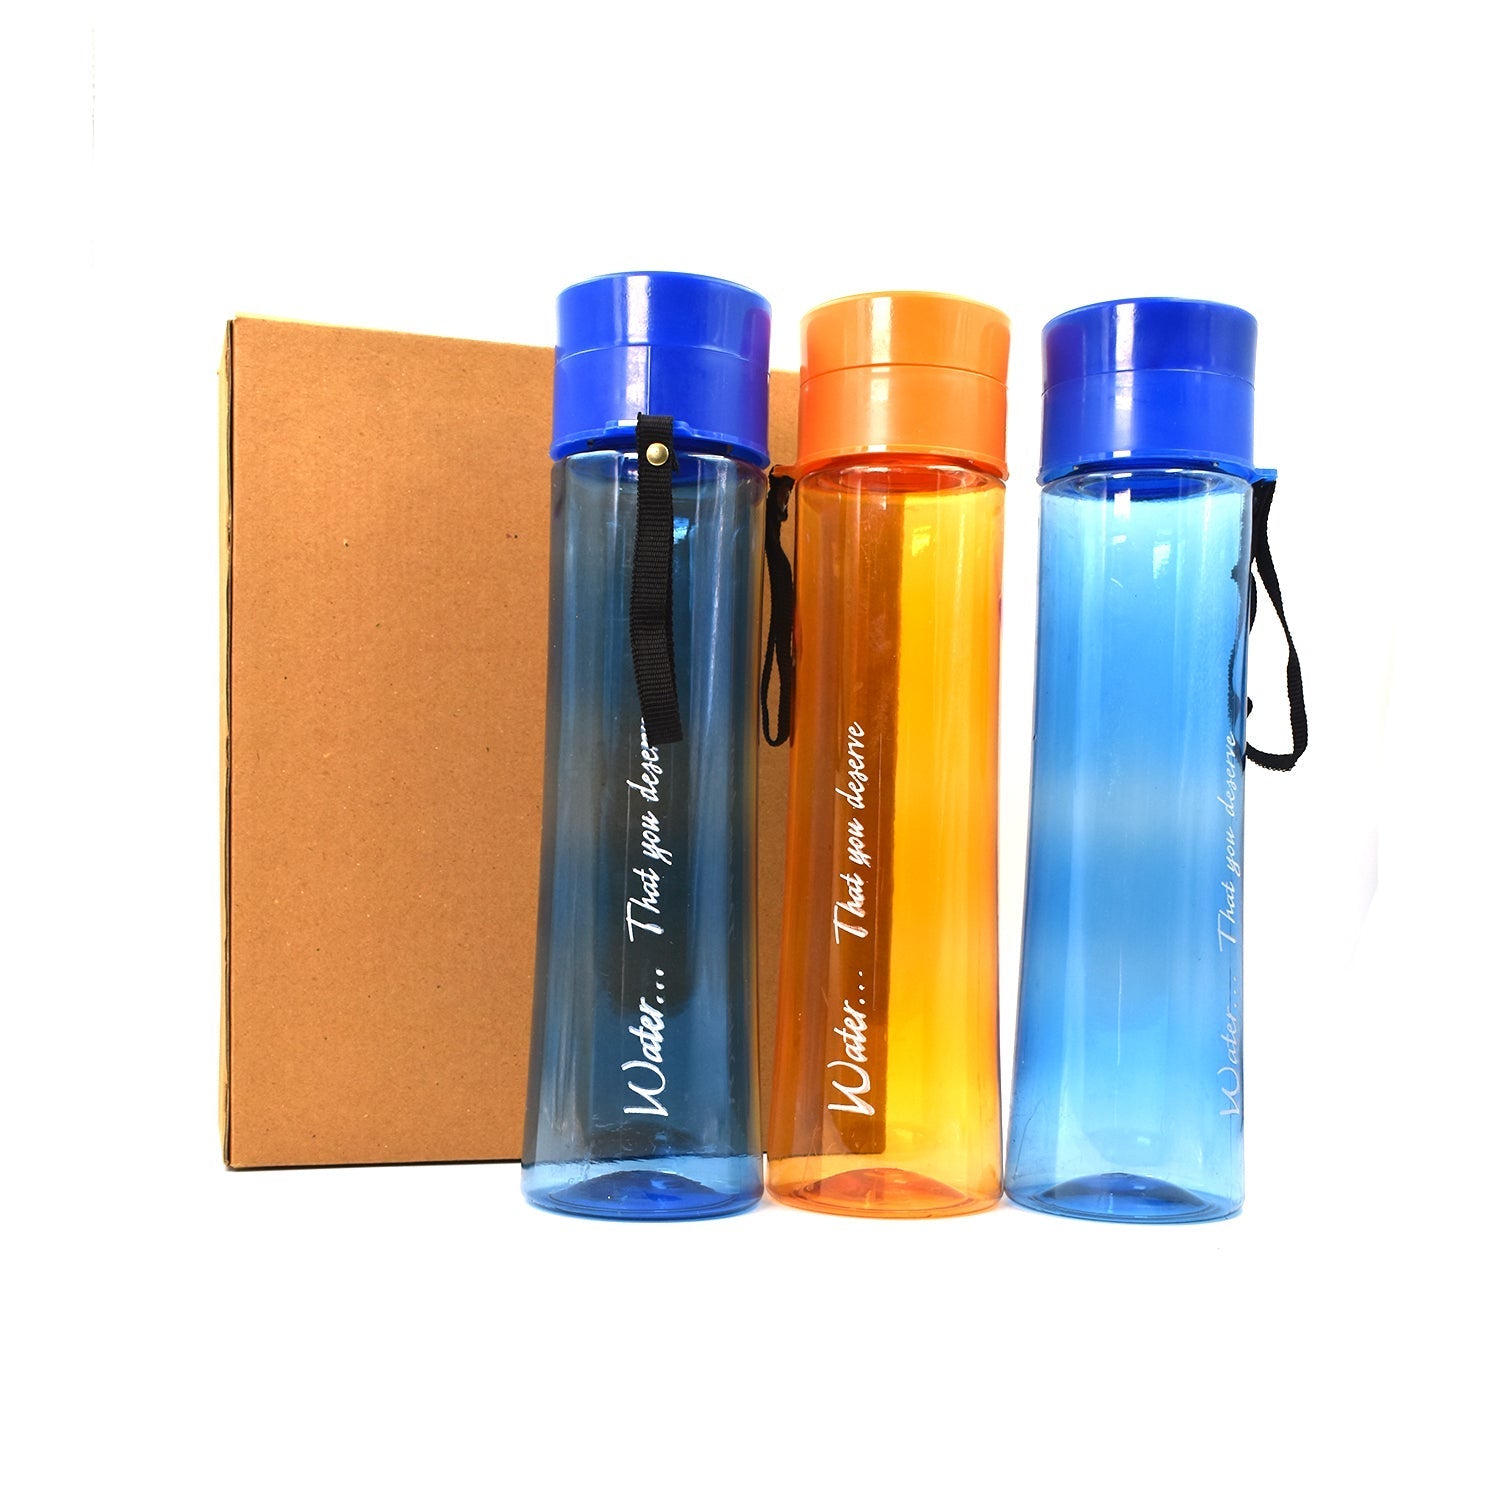 2716 Unbreakable, Leakproof, Durable, BPA Free, Non-Toxic Plastic Water Bottles, 1 Litre (Pack of 3, Assorted Color)